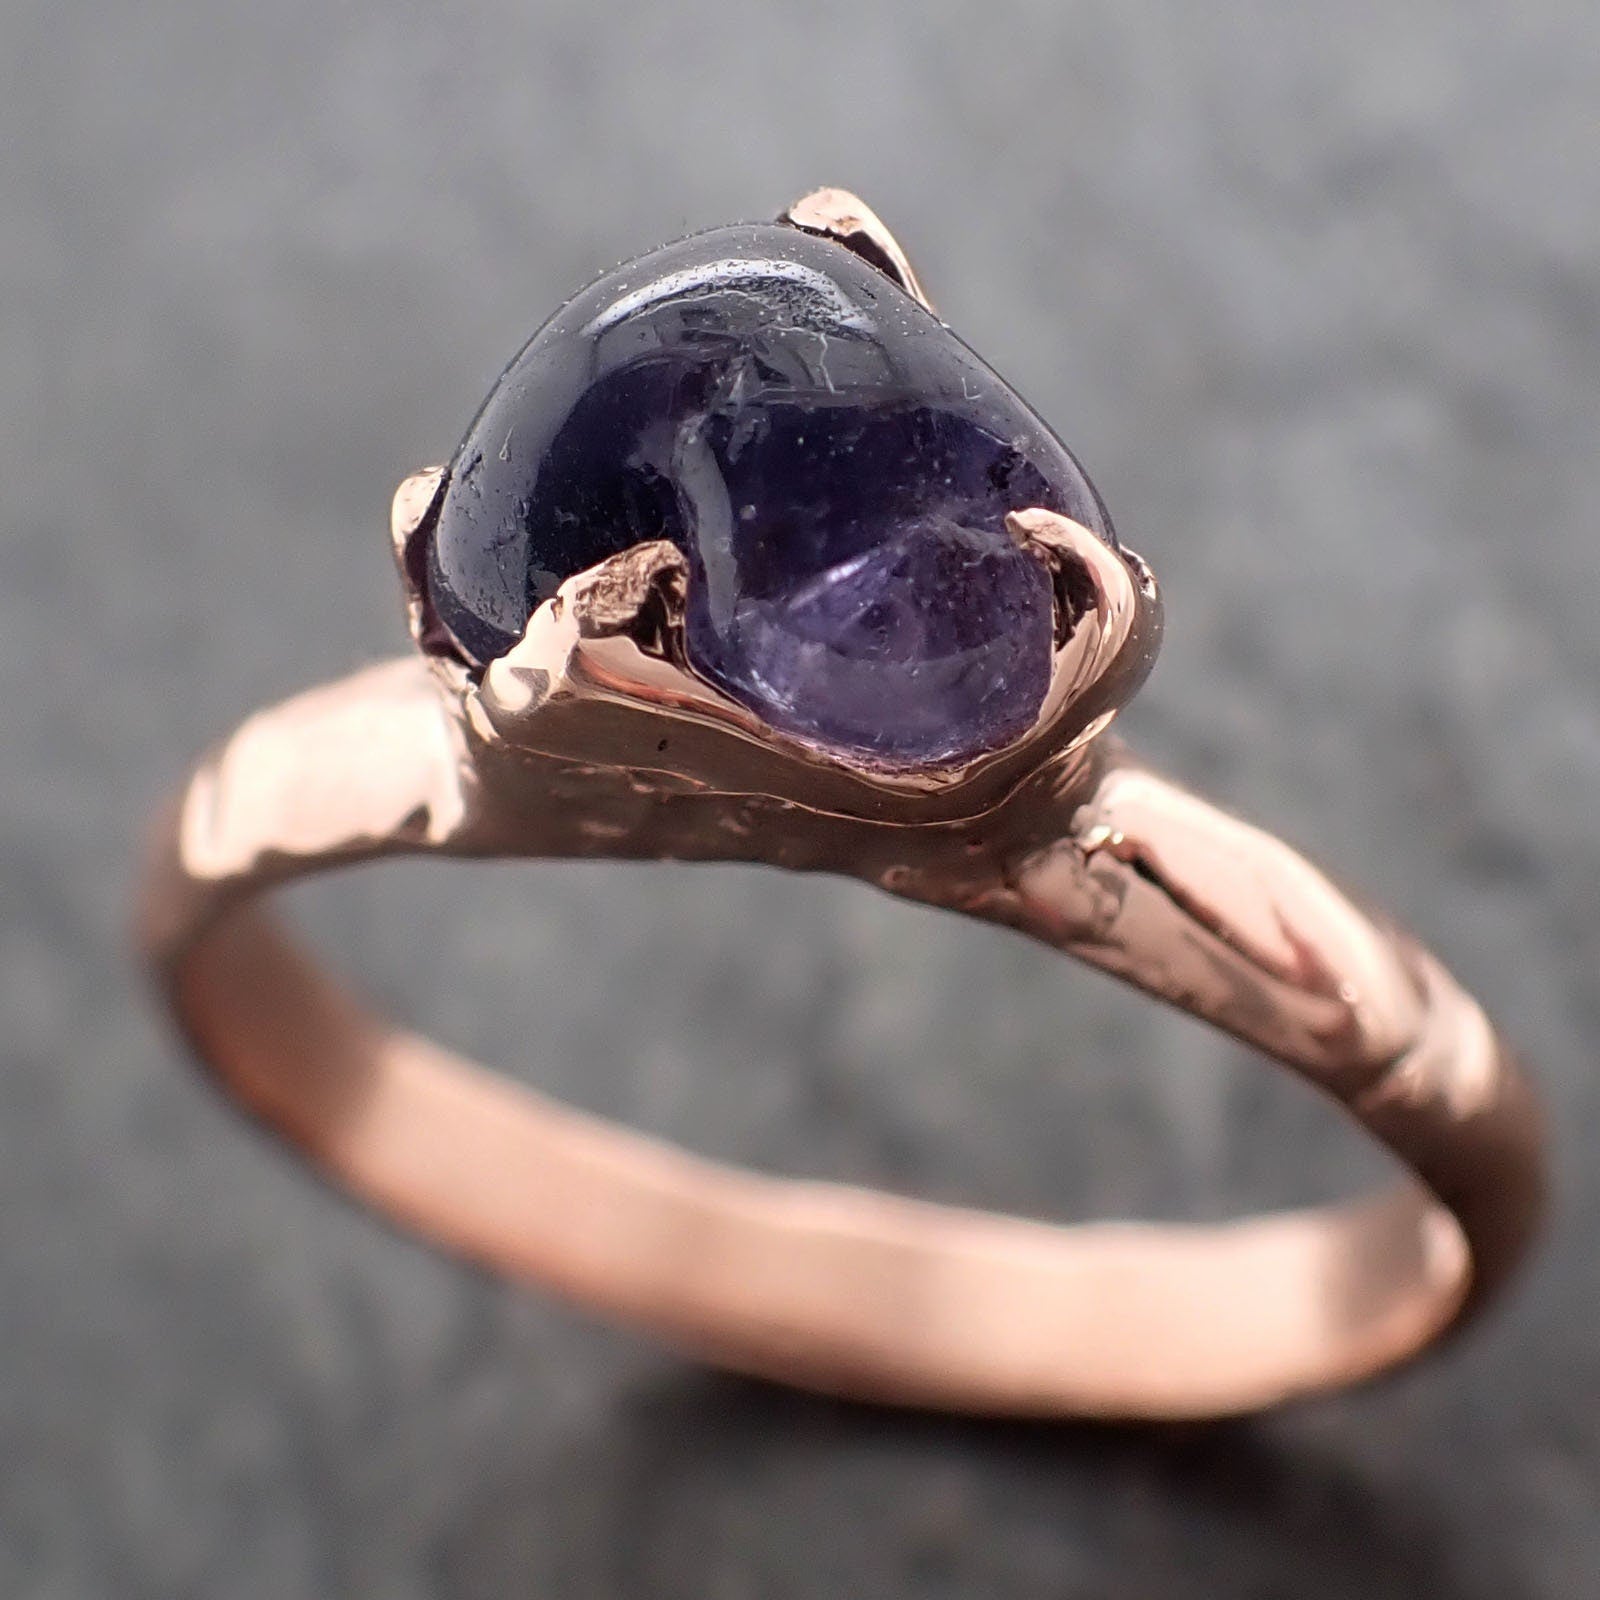 Sapphire Pebble Purple polished 14k Rose gold Solitaire gemstone ring 2922